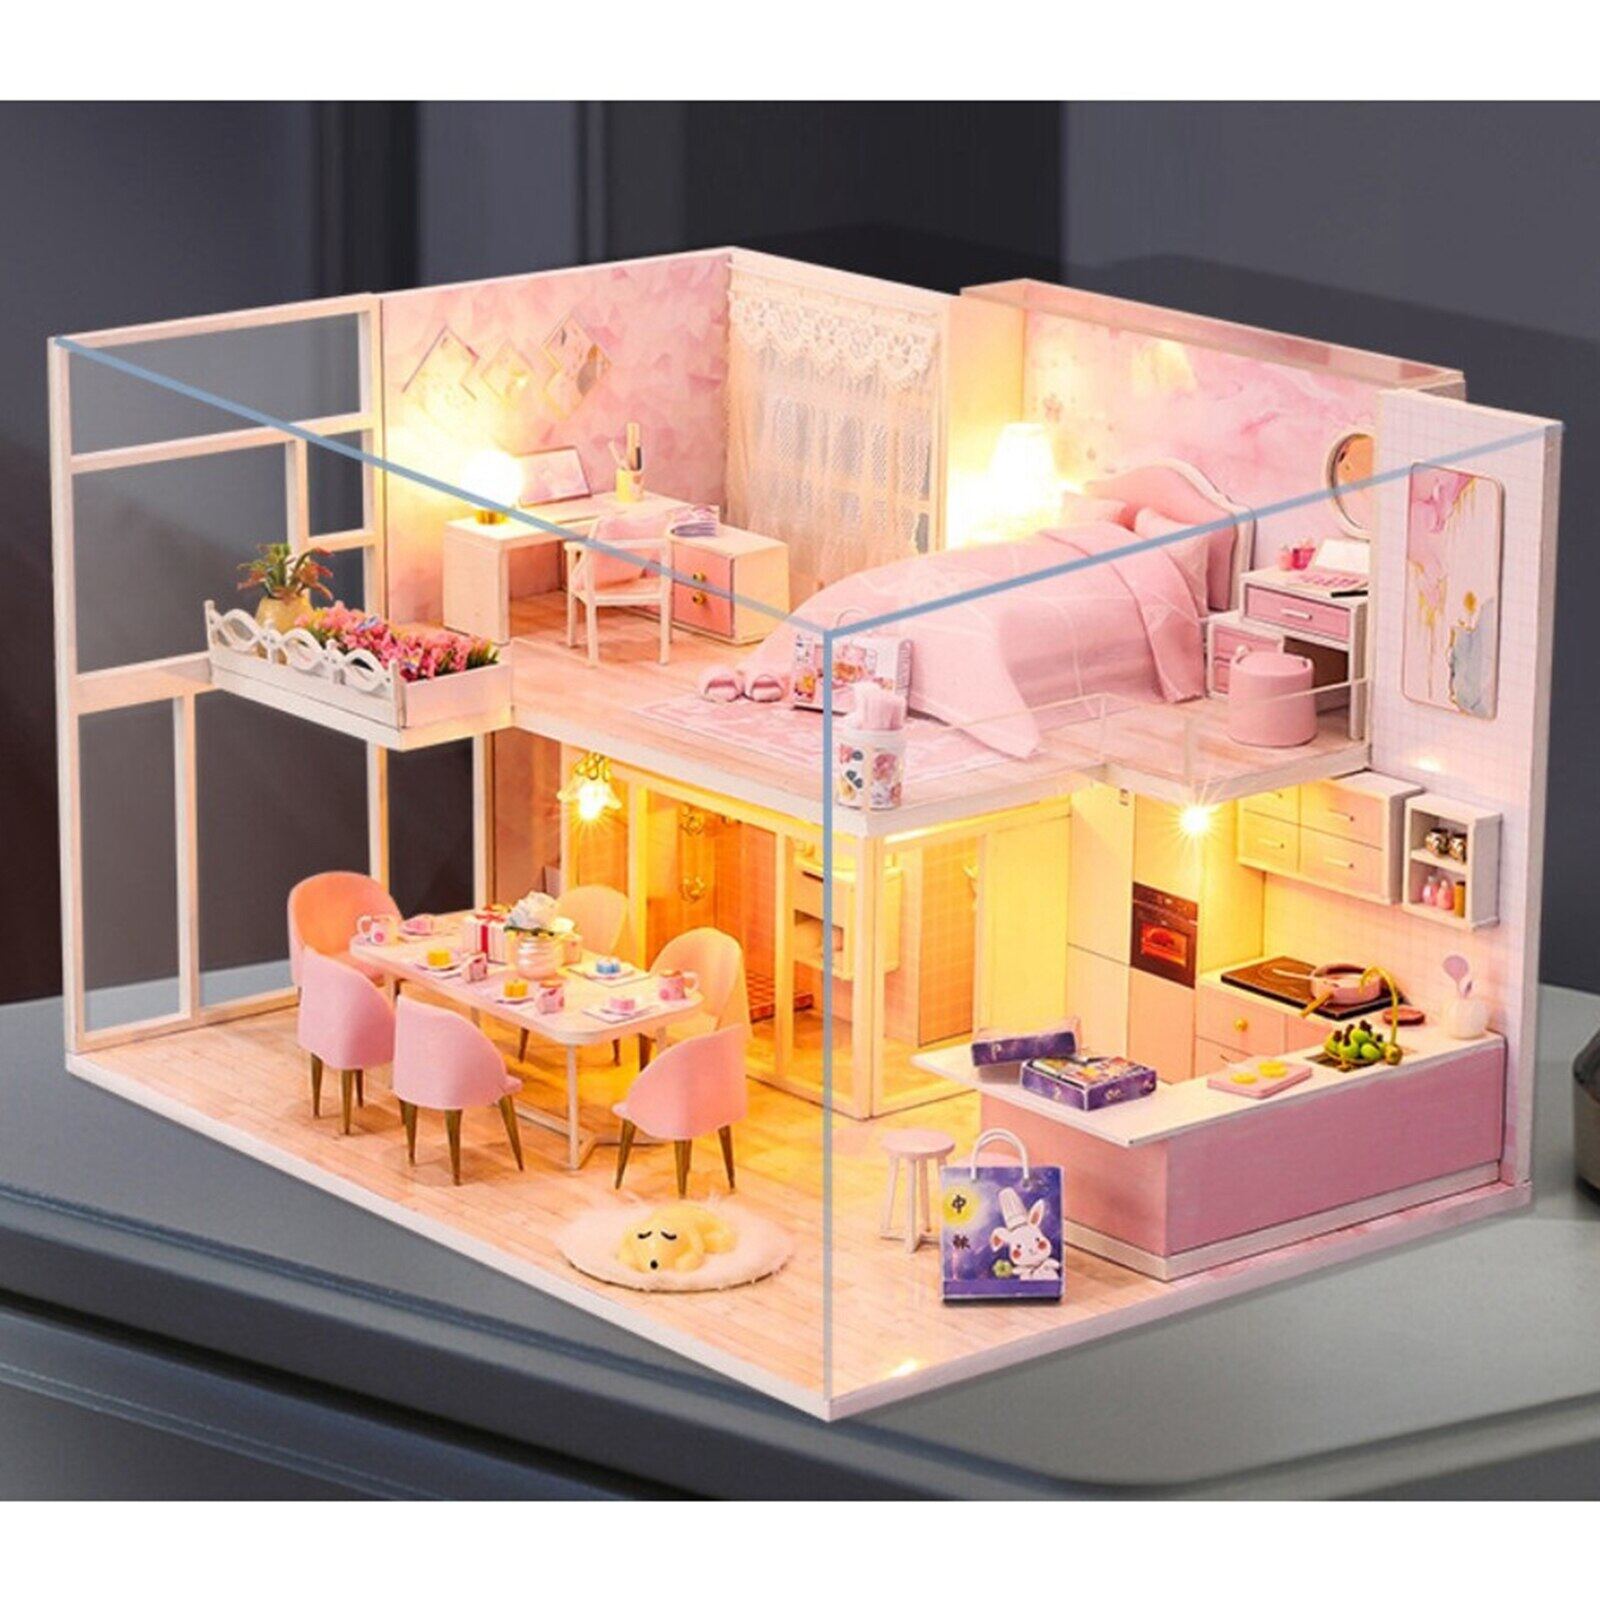 Self Assemble DIY Wooden House Toy Wooden Miniatura Doll Houses Miniature Dollhouse With Furniture LED Lights + Dustproof Cover